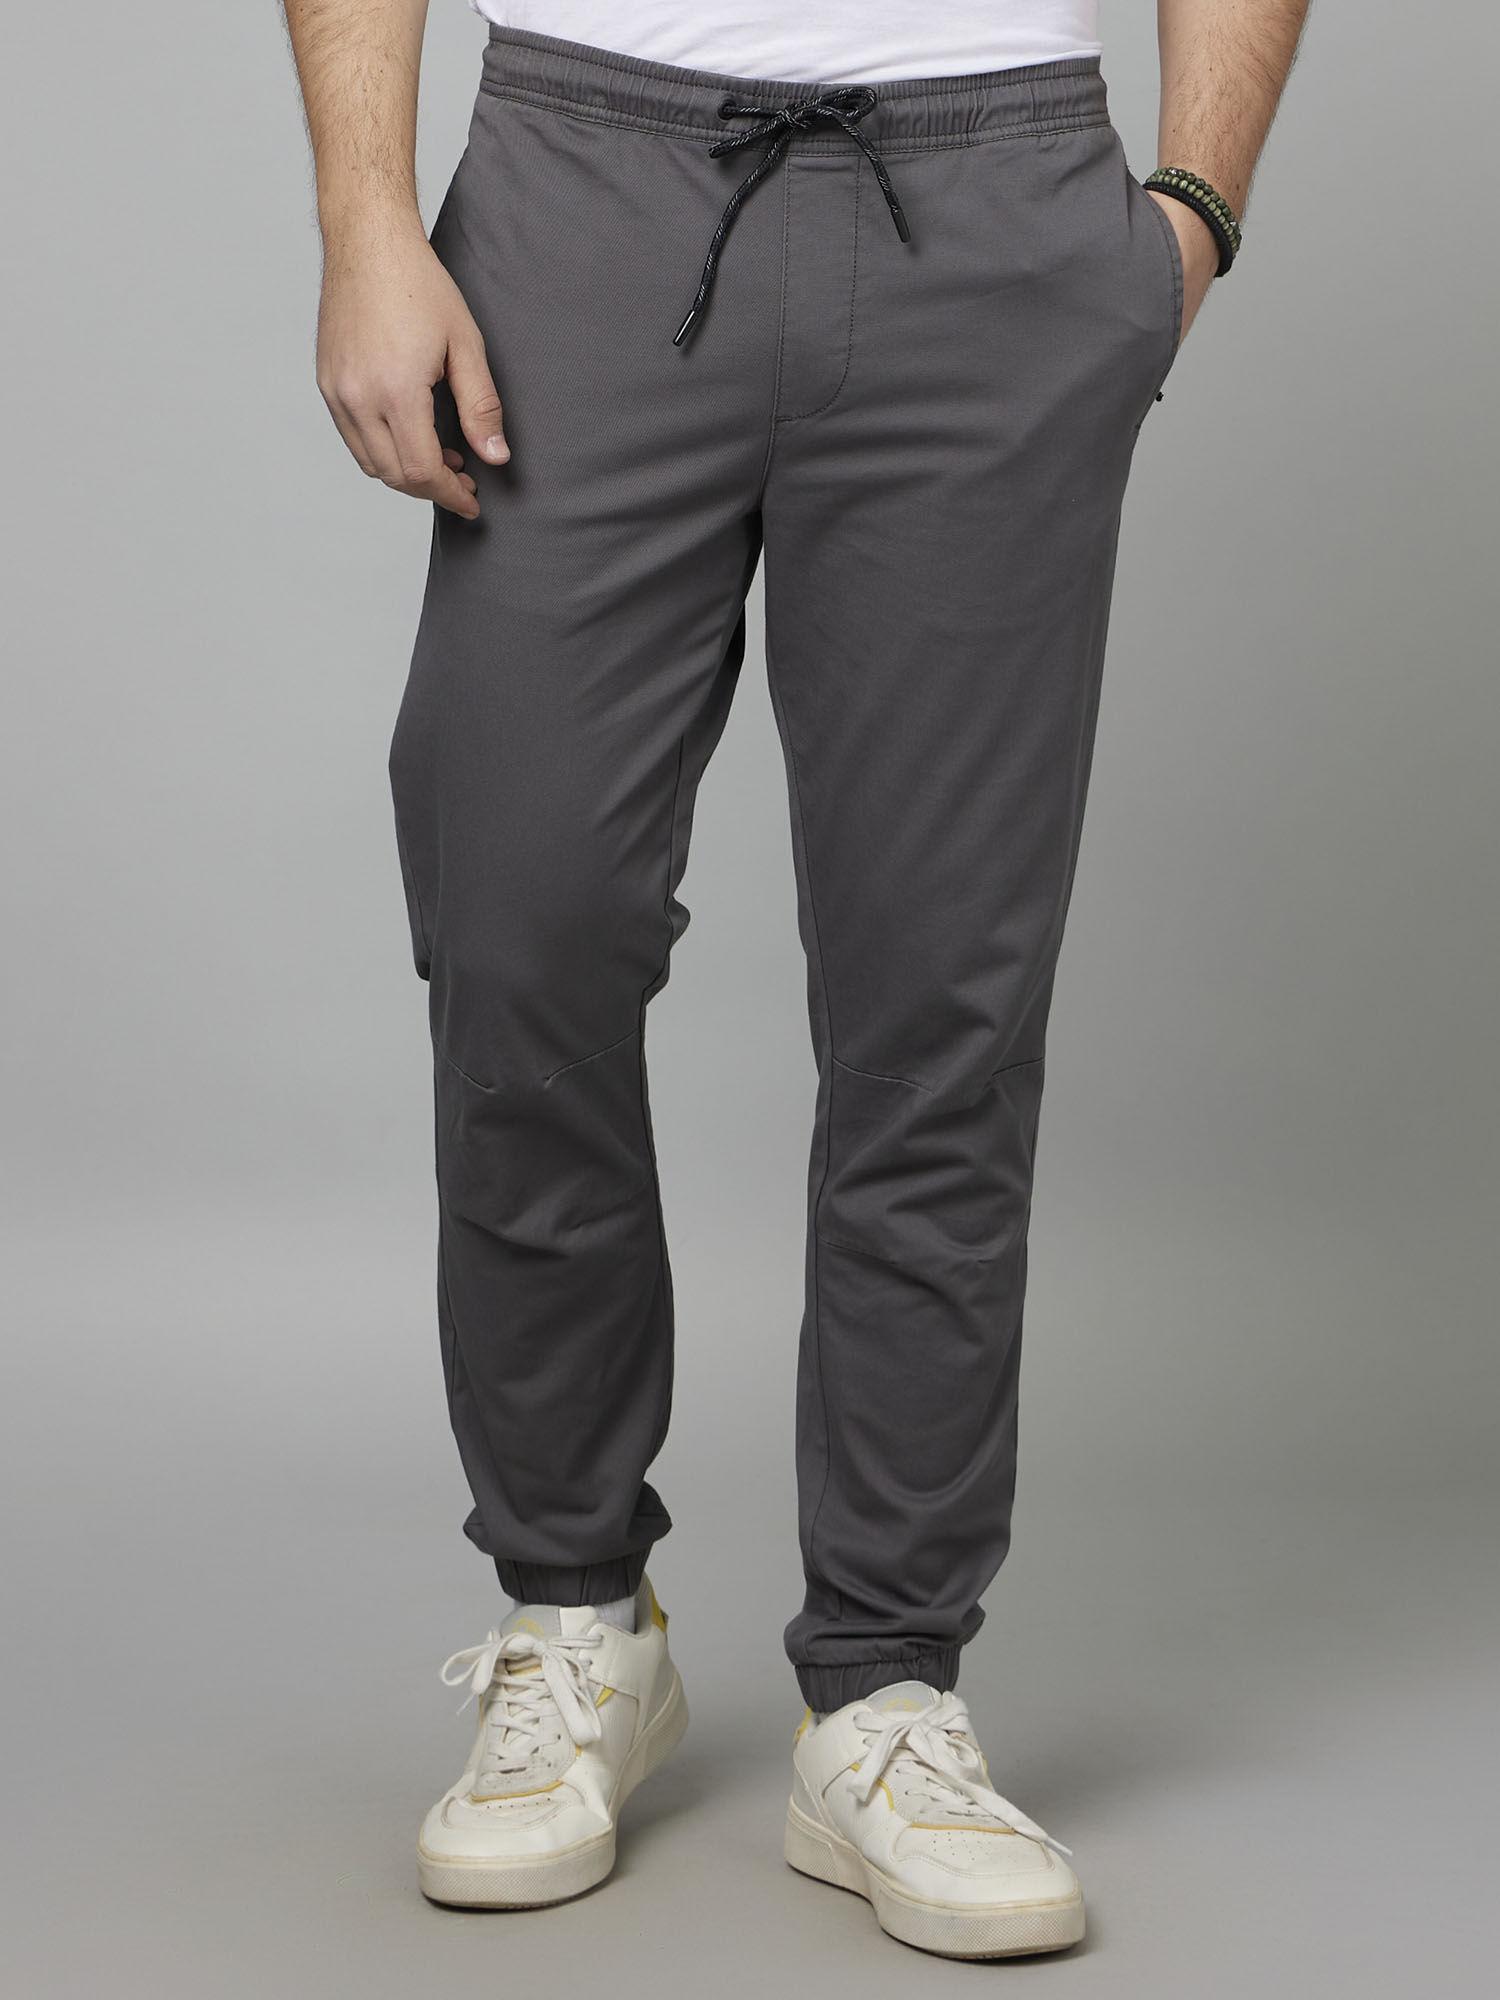 solid charcoal grey cotton joggers